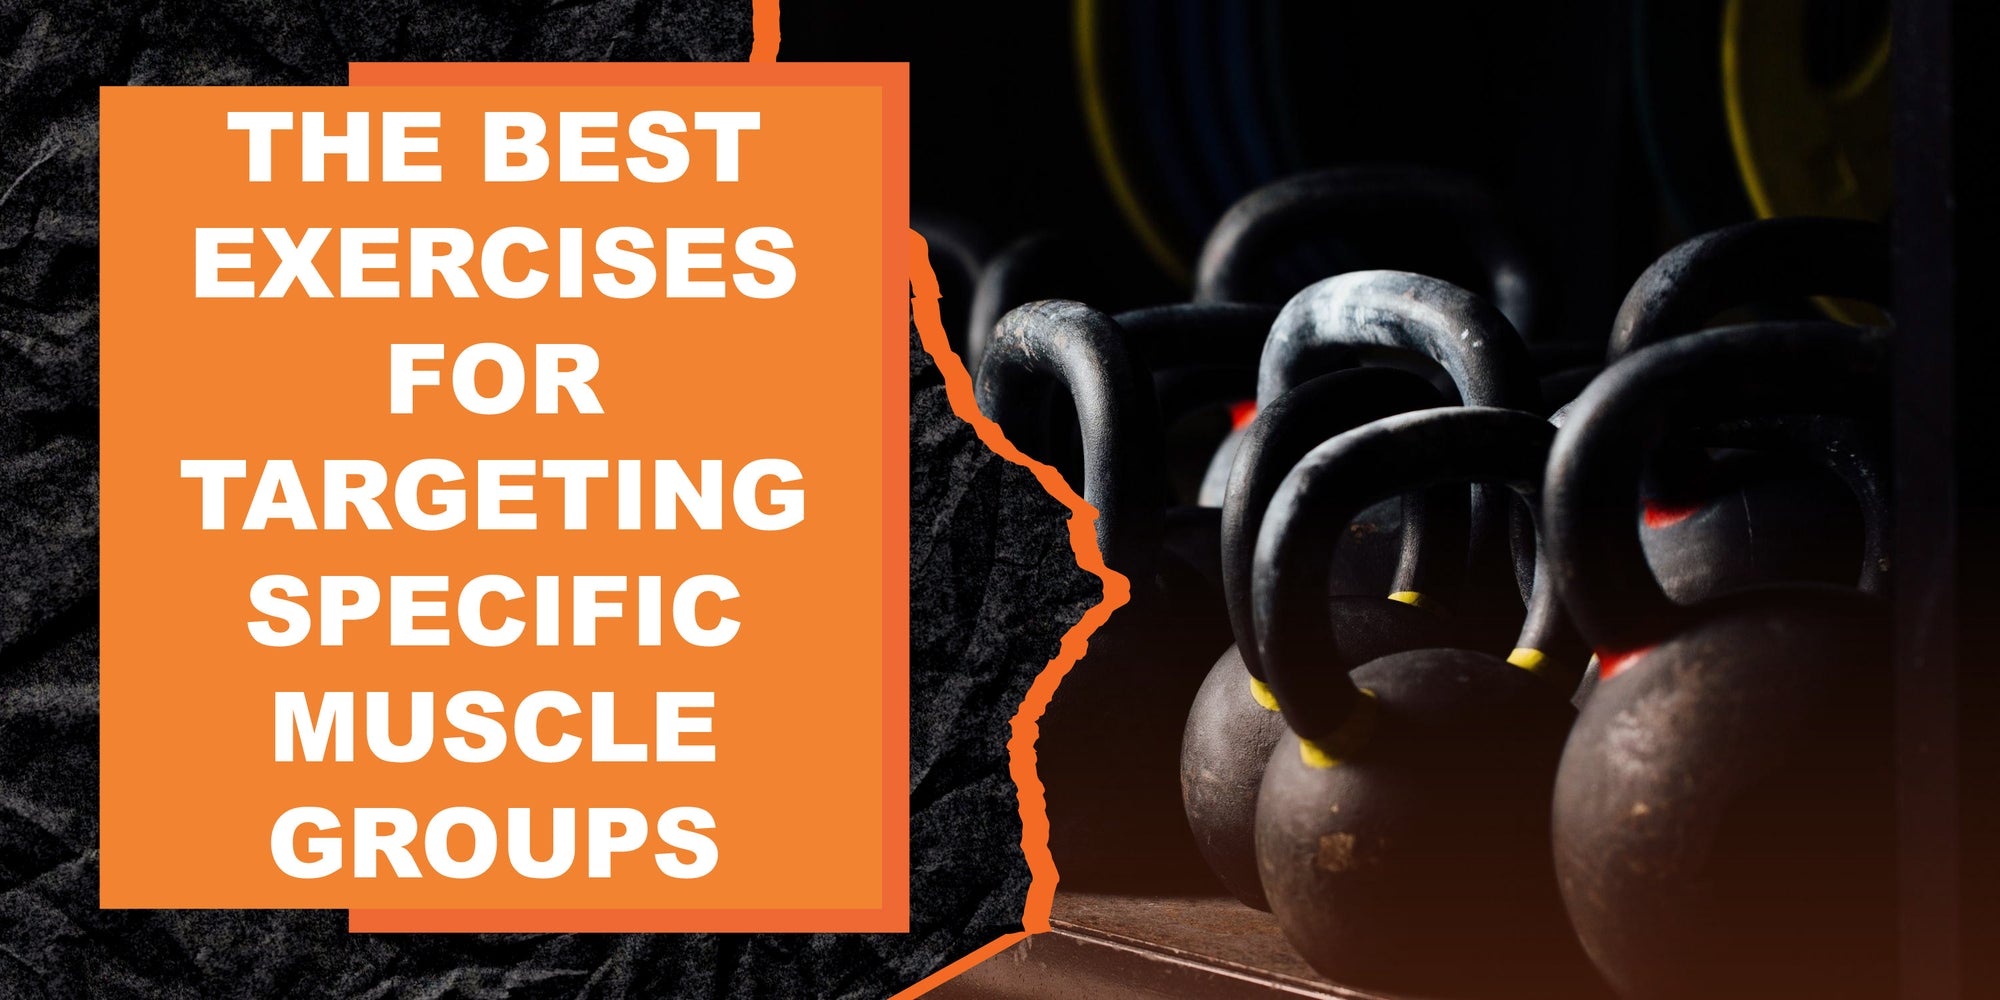 The Best Exercises for Targeting Specific Muscle Groups